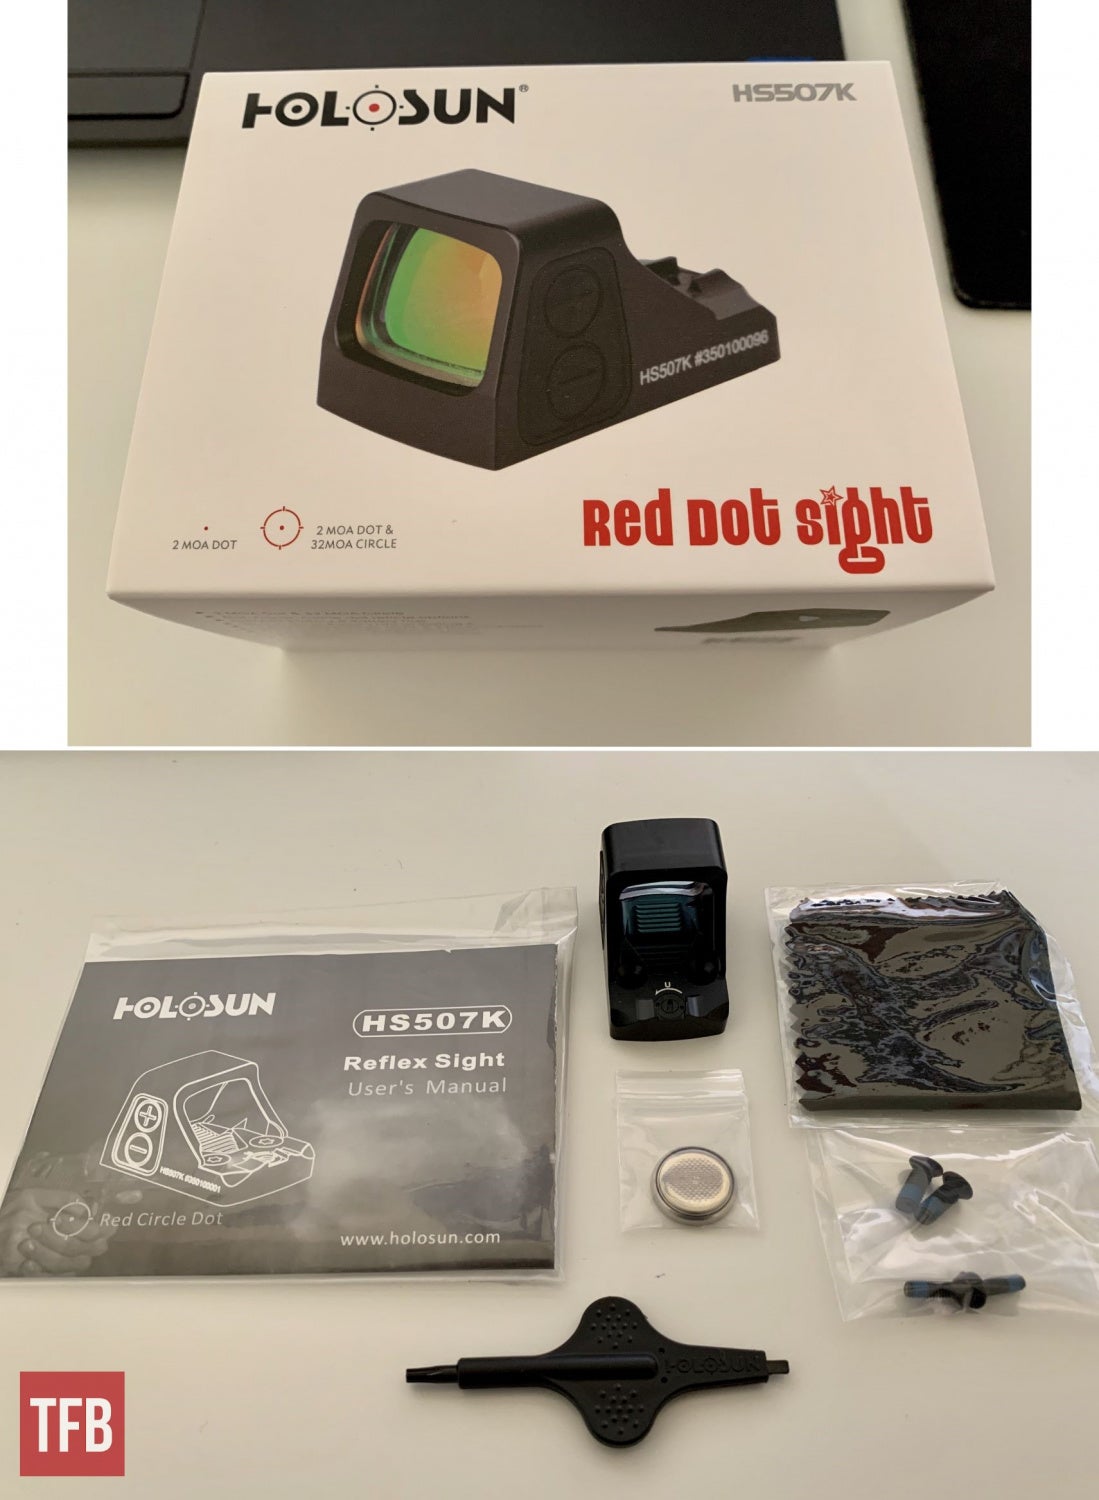 Unboxing the Holosun 507K, with the red dot and other package contents laid out.